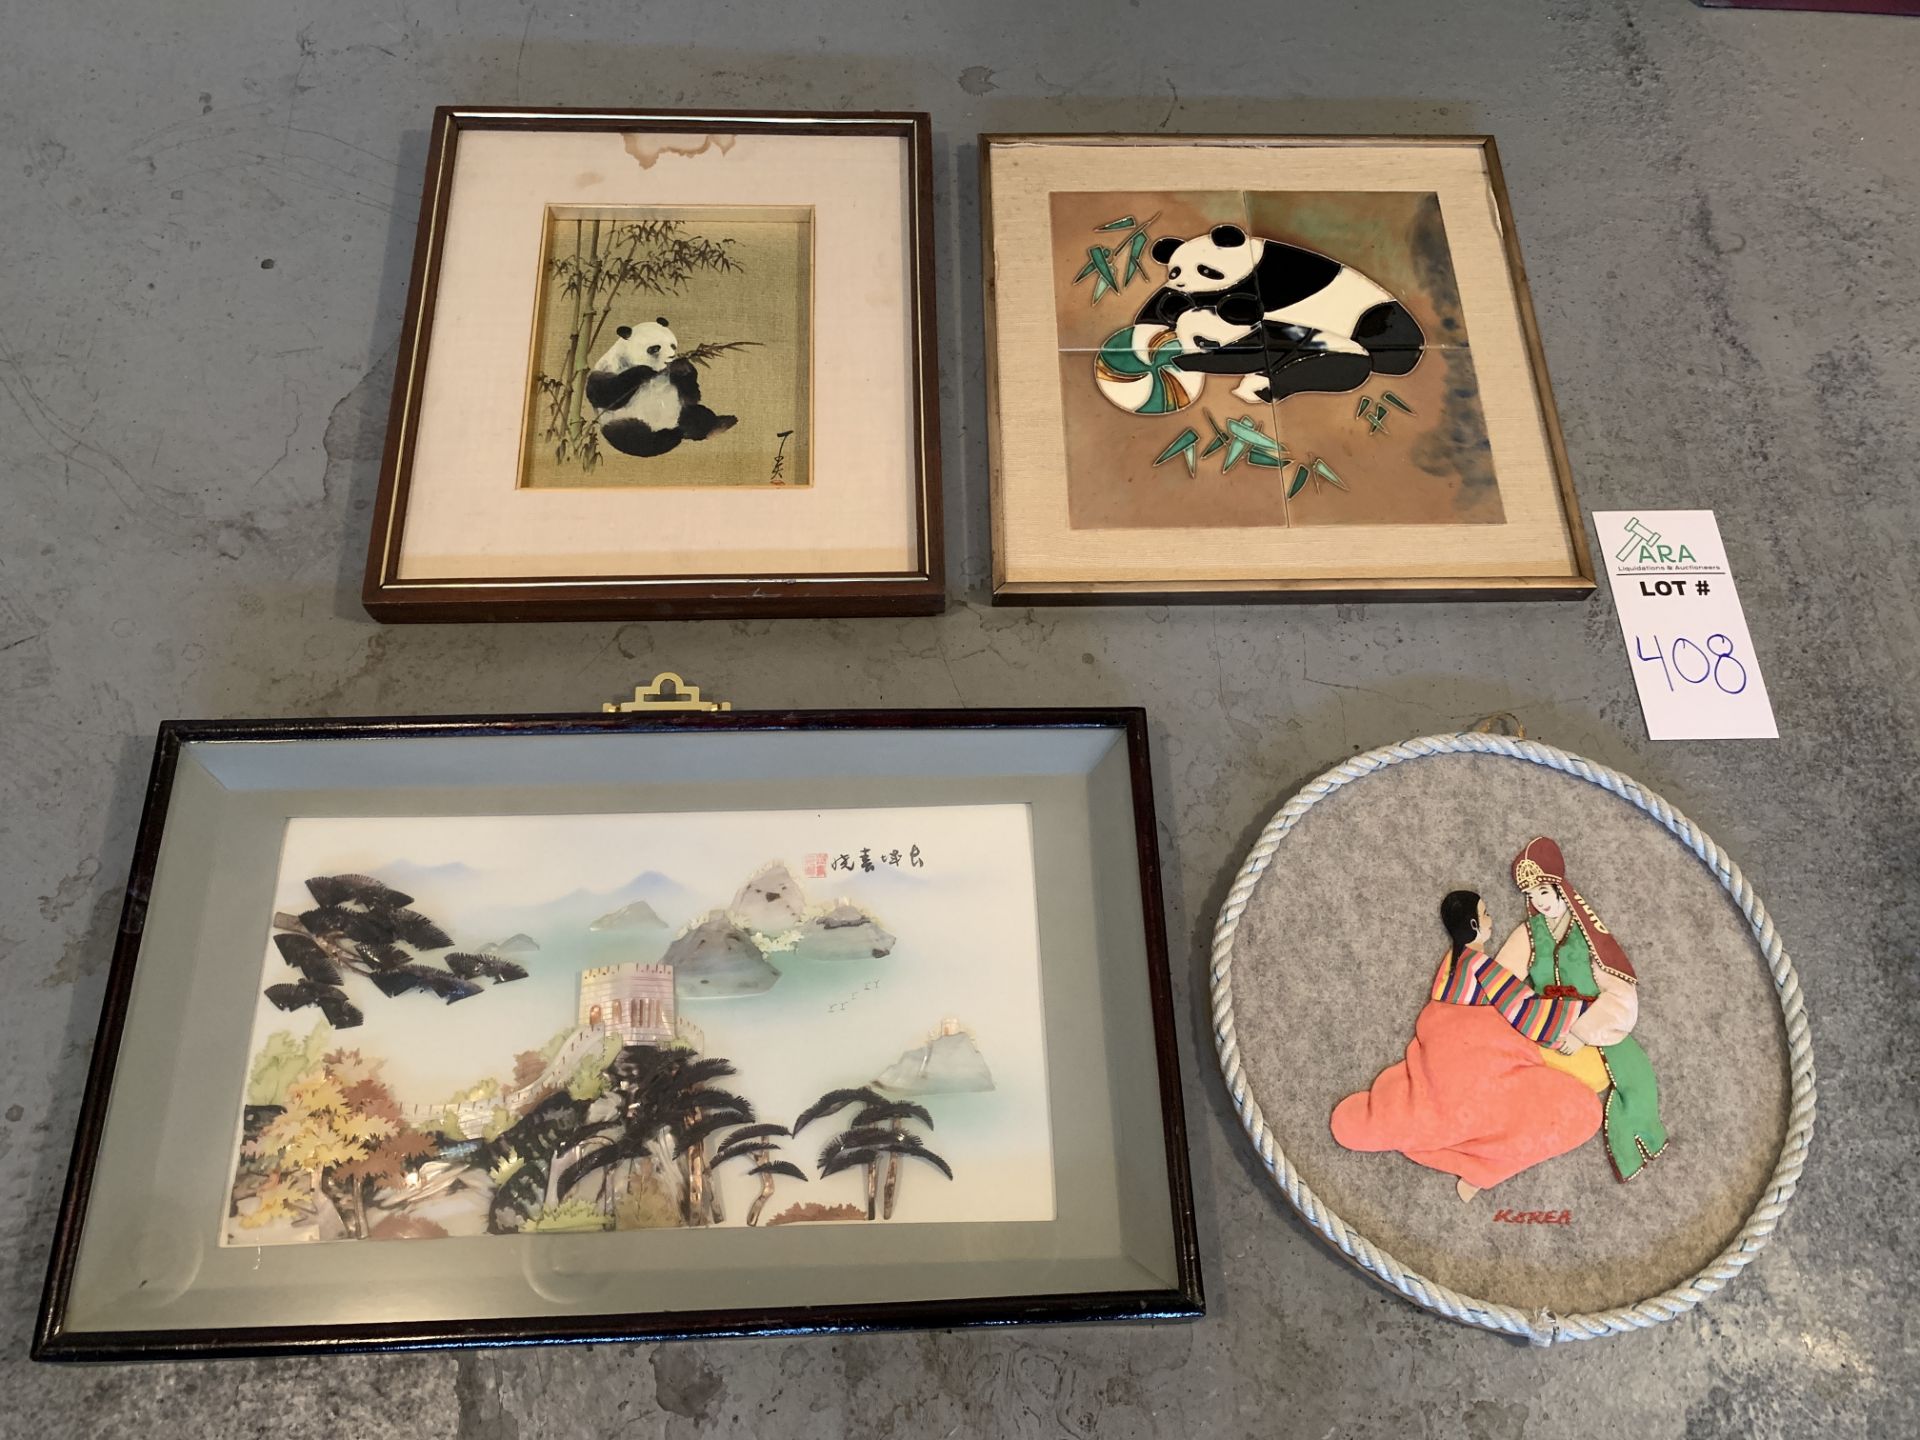 5 ART PIECES IN PANDA AND EAST ASIAN THEMES. DIMENSIONS, CLOCKWISE FROM TOP LEFT: 17X15", 16X16",